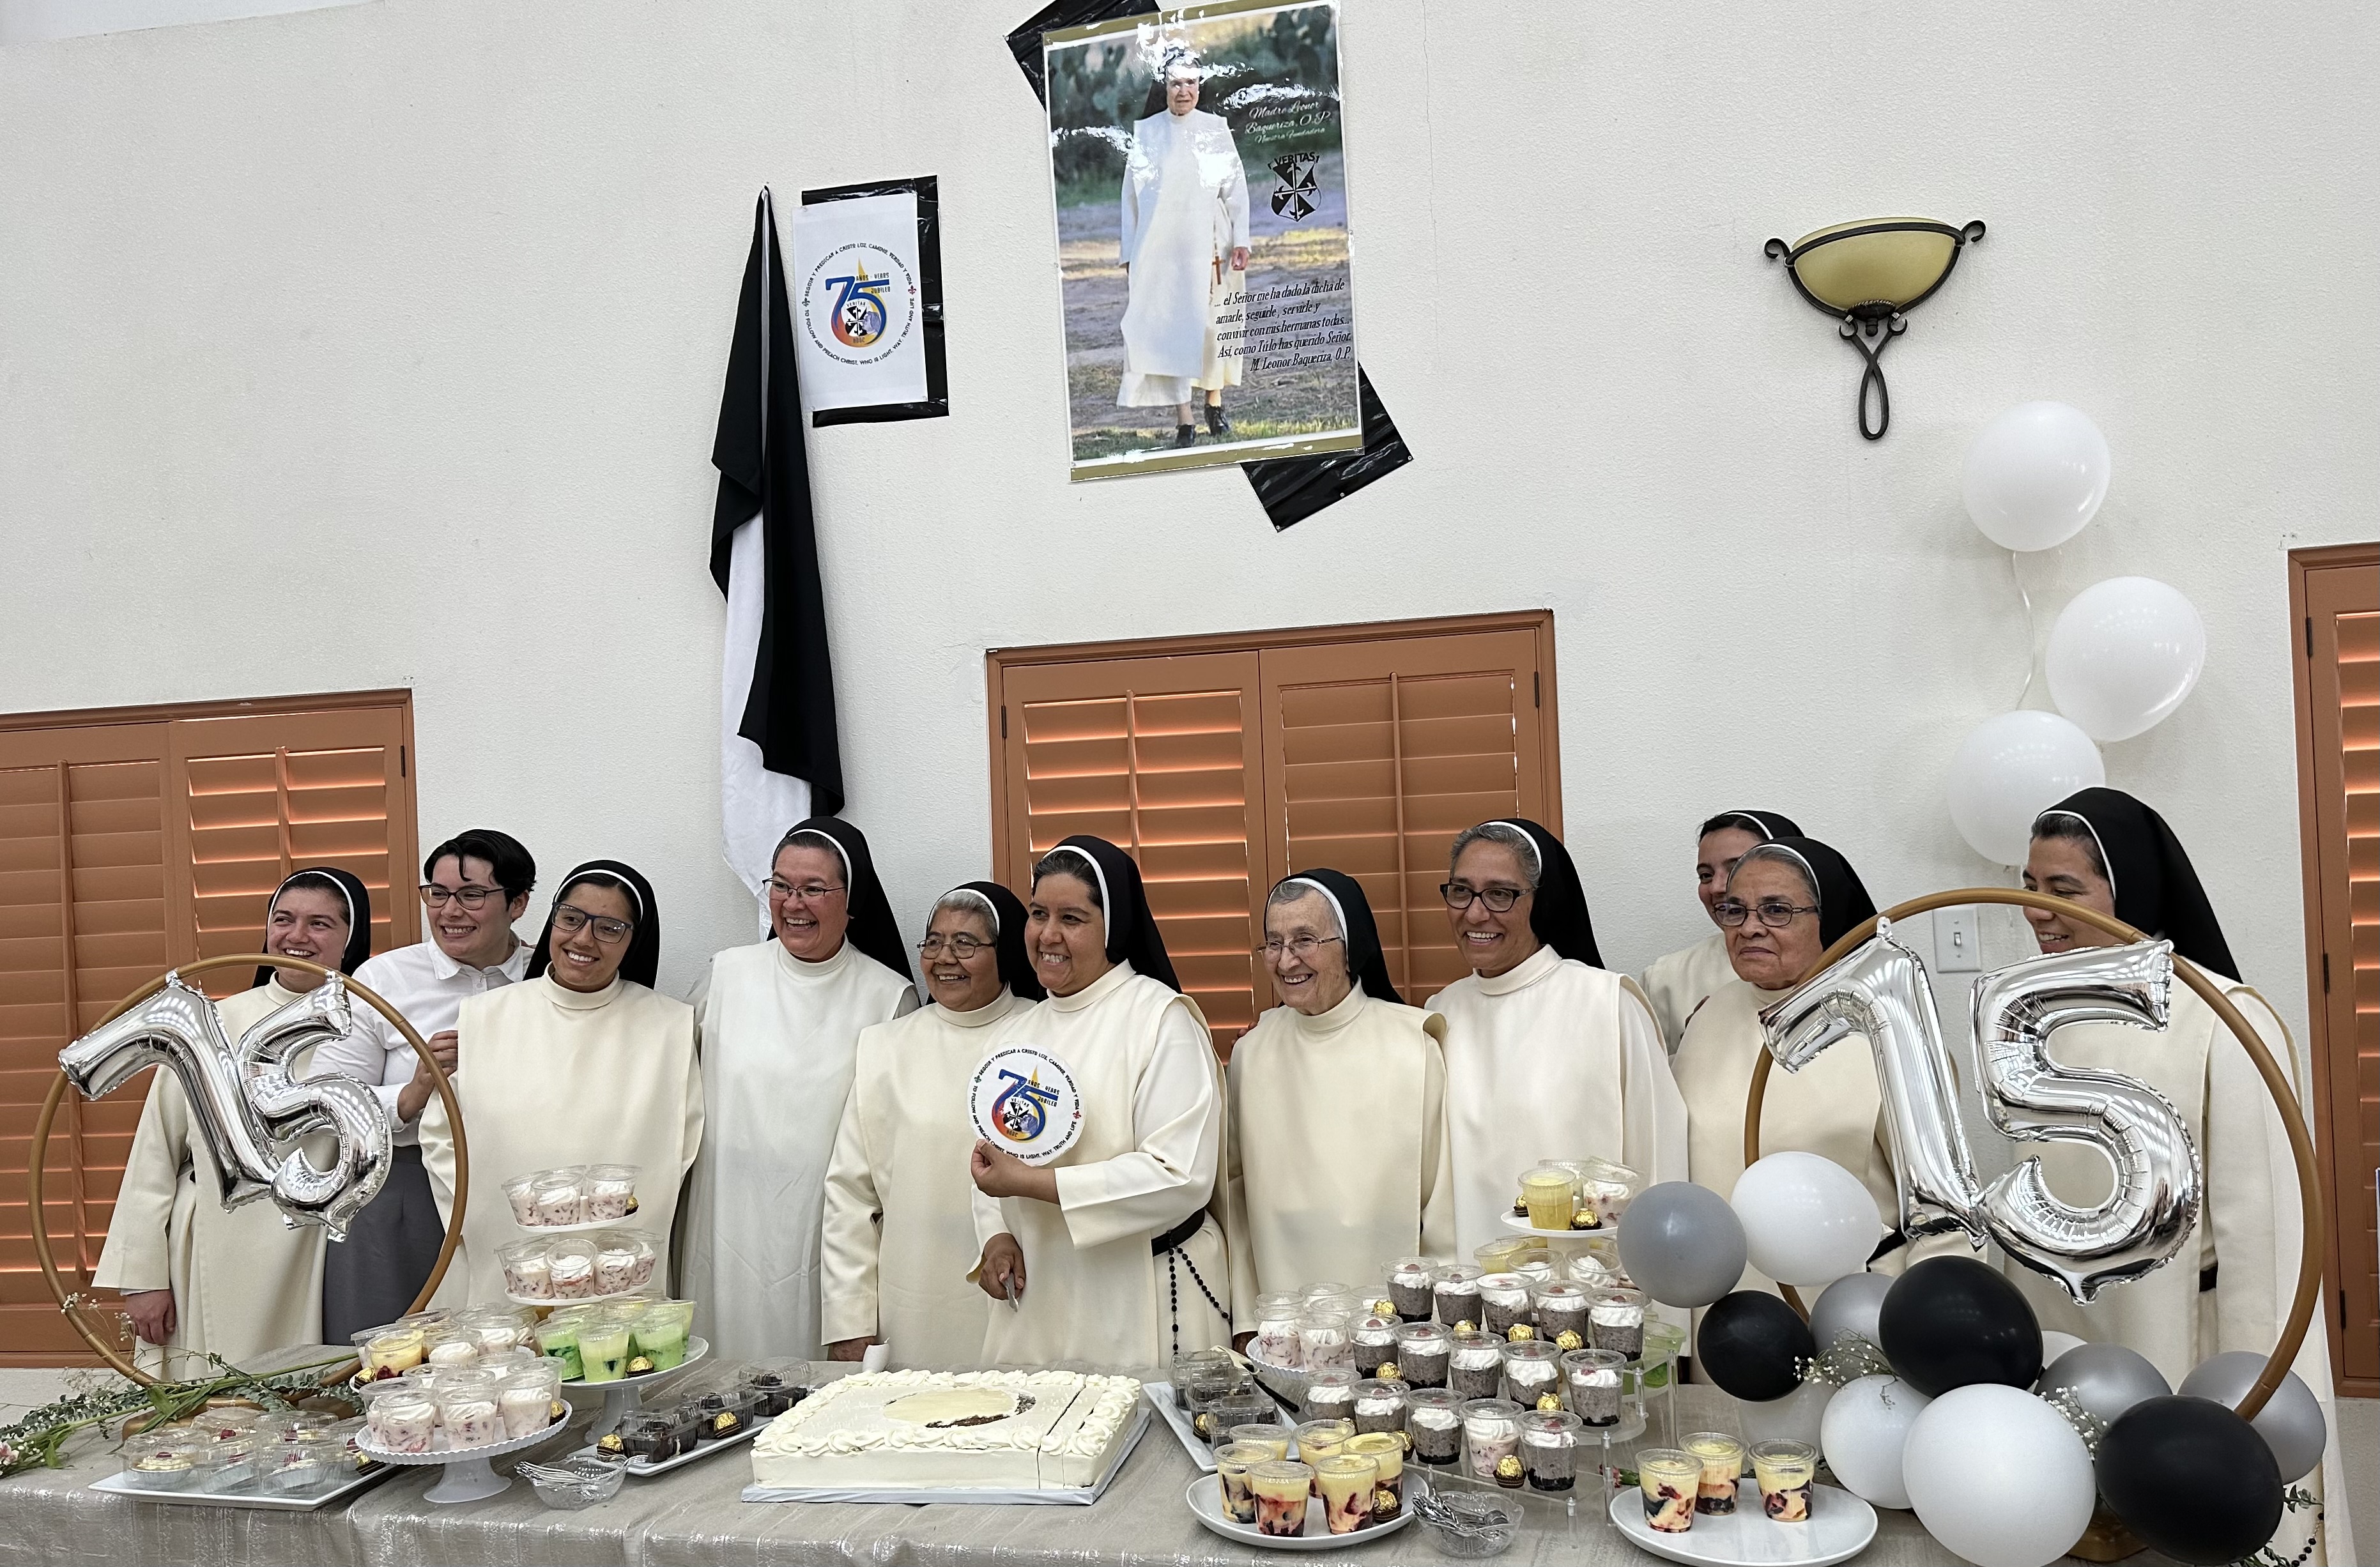 Some of the Dominican Sisters during one of the celebrations at the Convent of San Alberto Magno in the North America province (Elia Cárdenas)